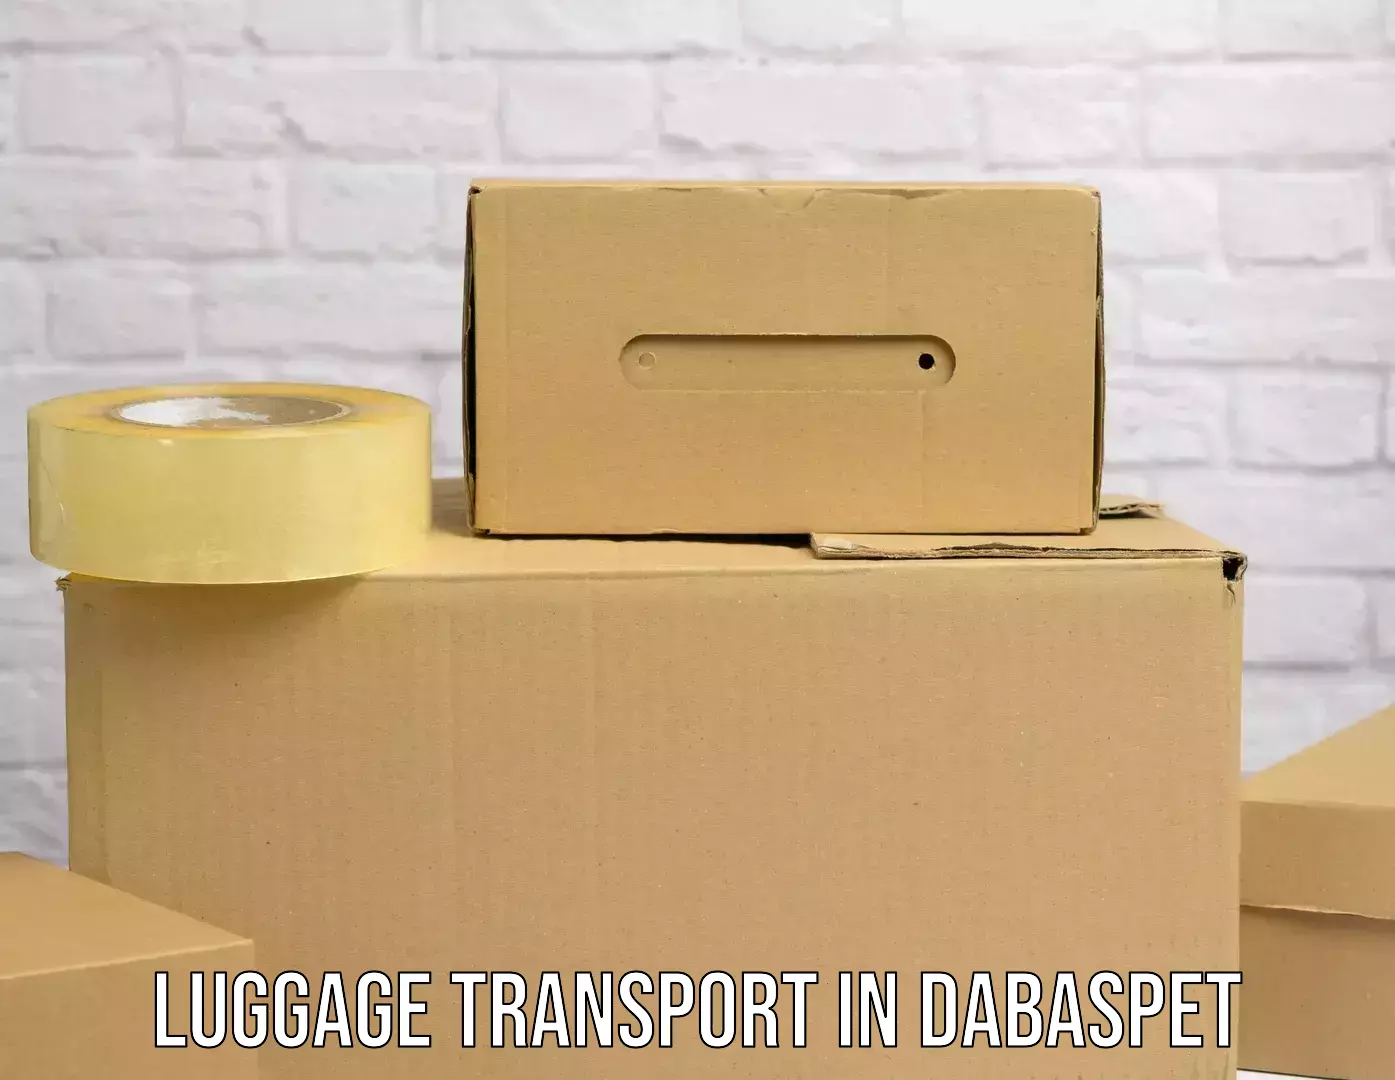 Heavy luggage shipping in Dabaspet